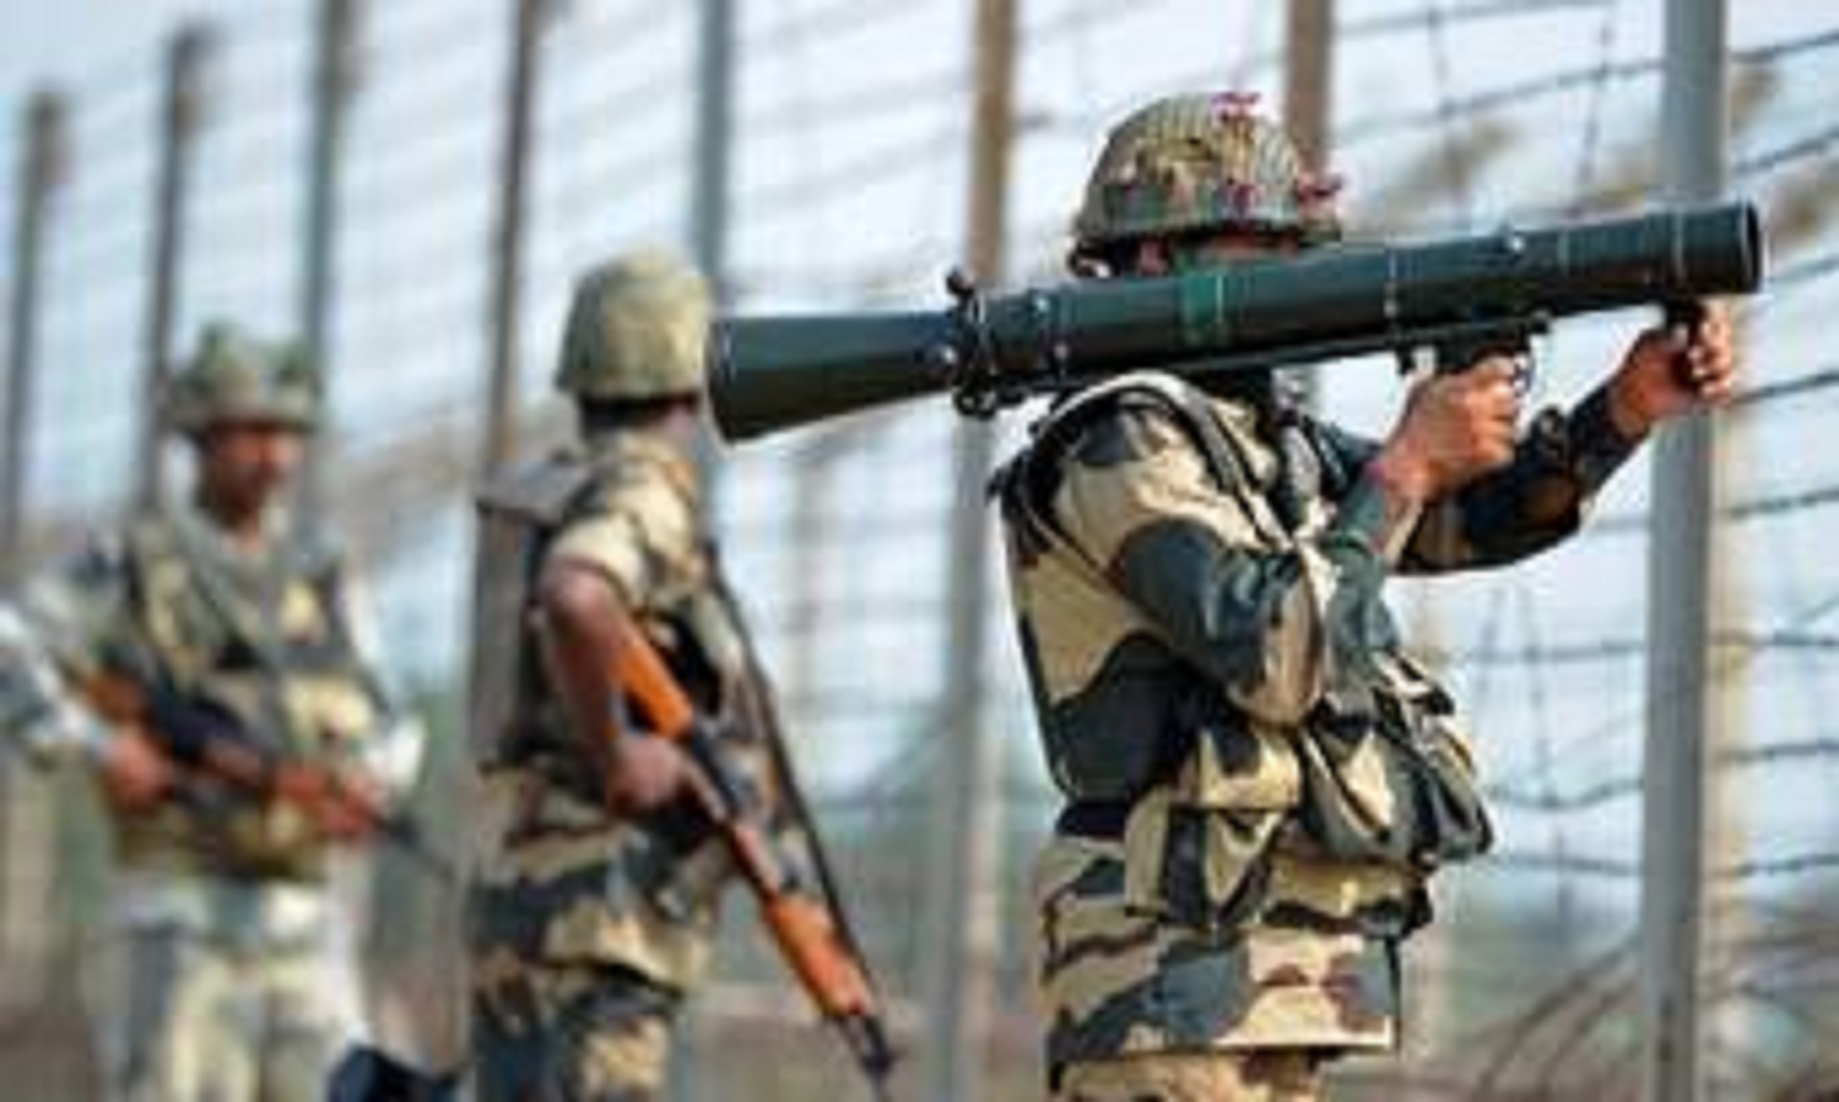 Four Pakistani Civilians, One Soldier Killed In Indian Firing: Pakistani Army